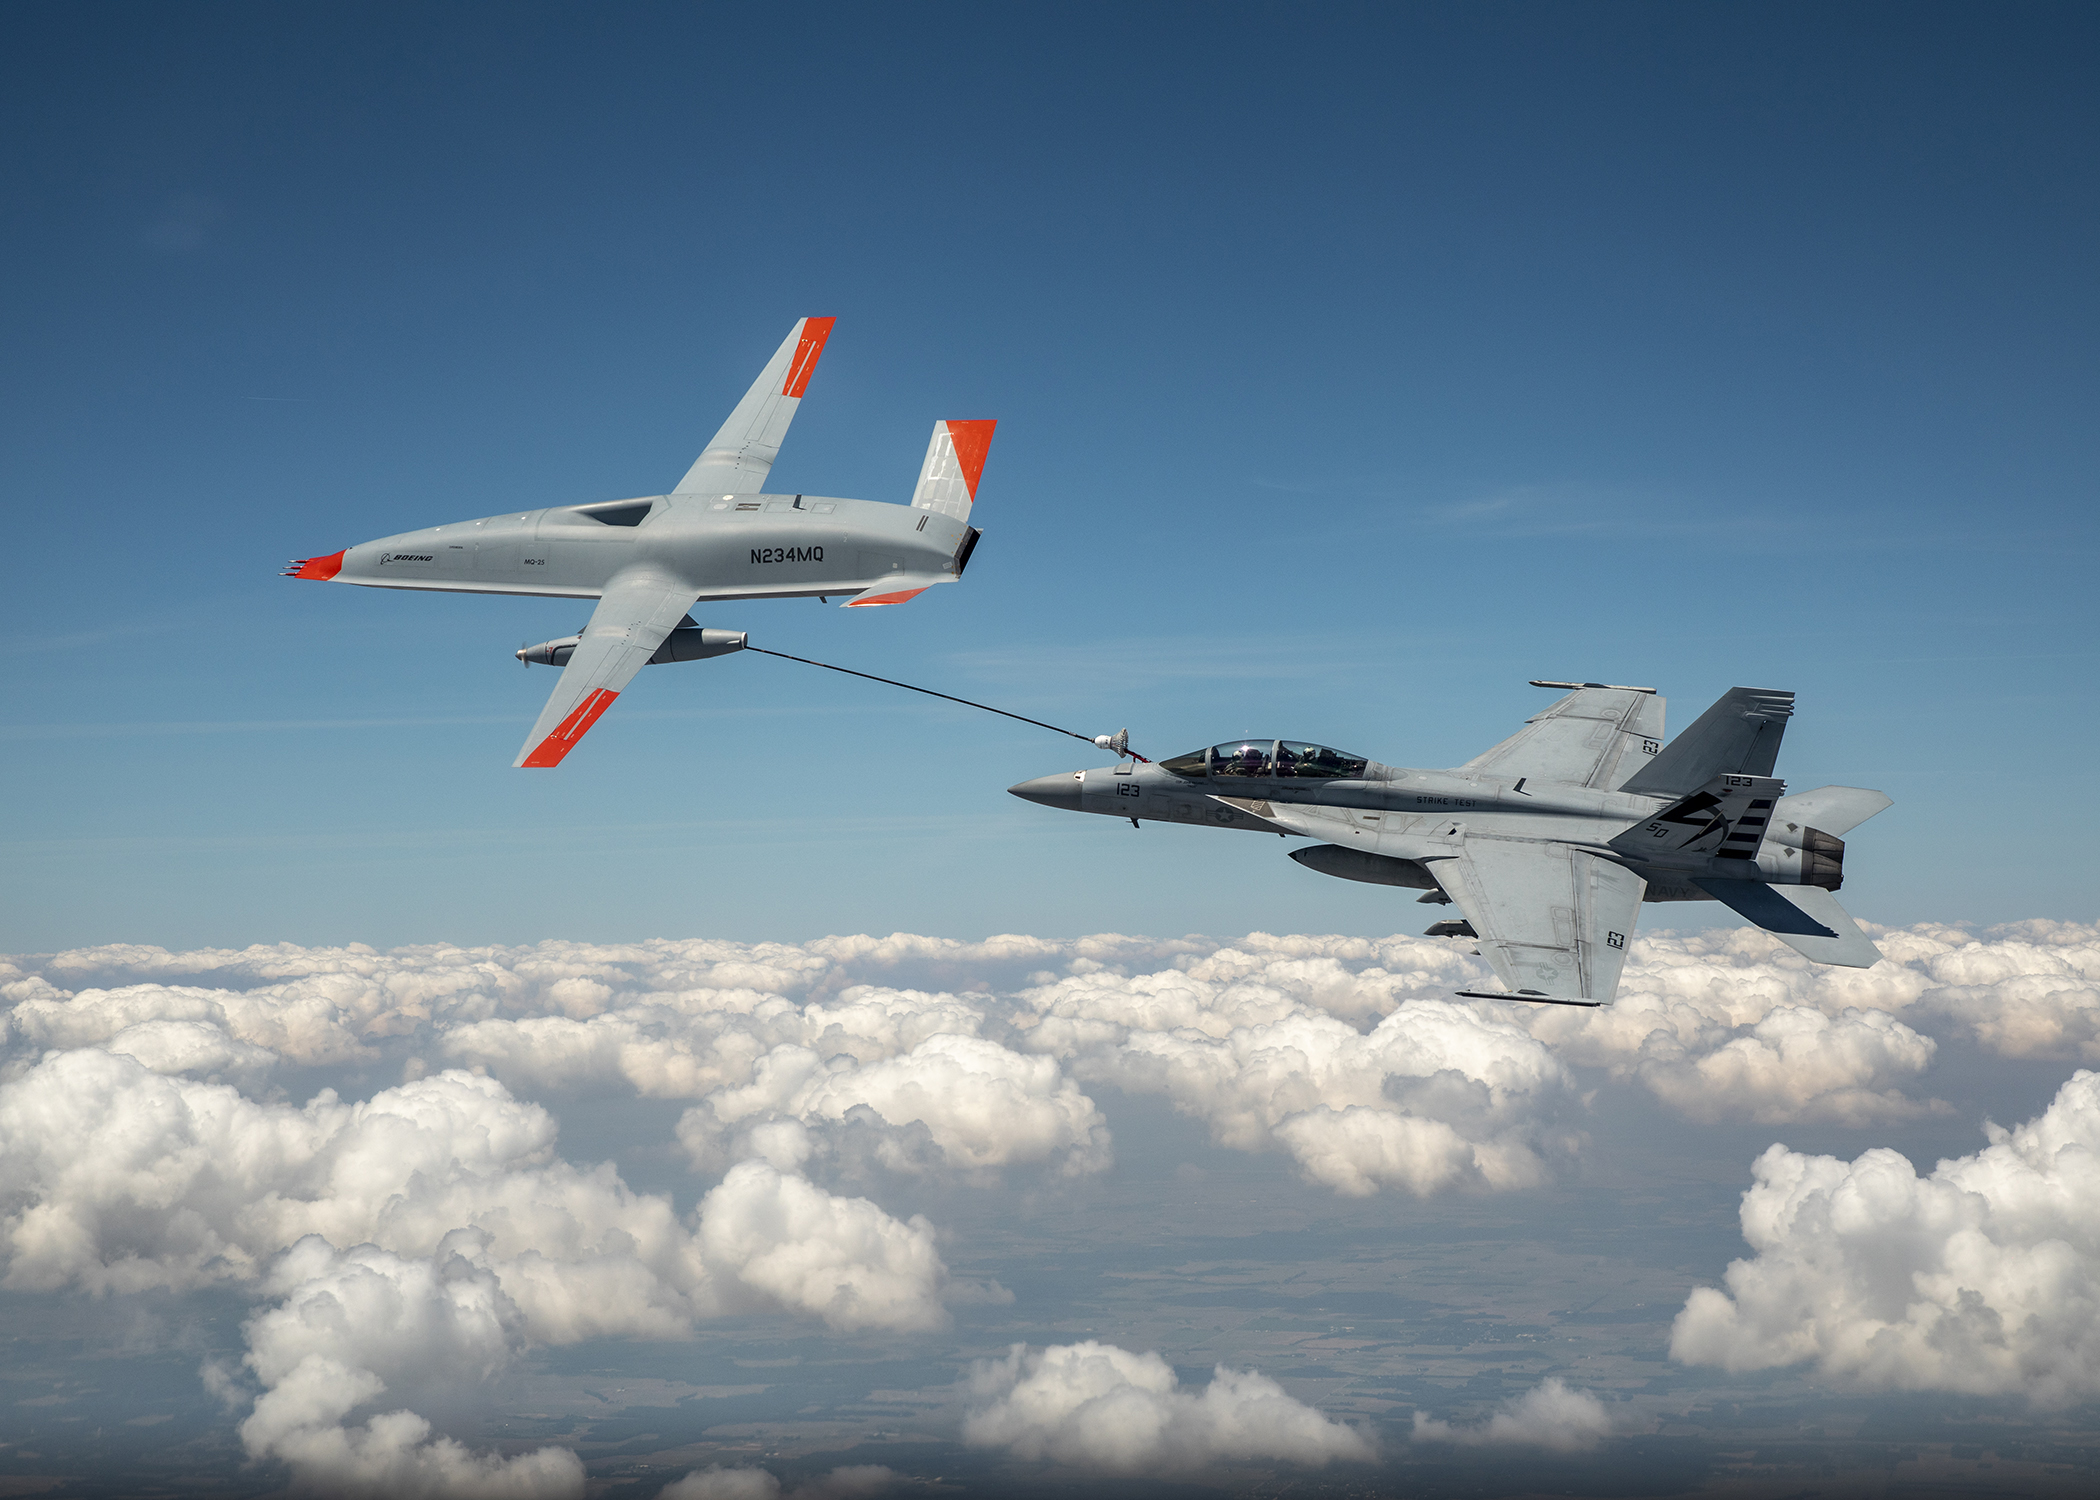 The Boeing MQ-25 T1 test asset transfers fuel to a US Navy F/A-18 Super Hornet on June 4, marking the first time in history that an unmanned aircraft has refueled another aircraft.